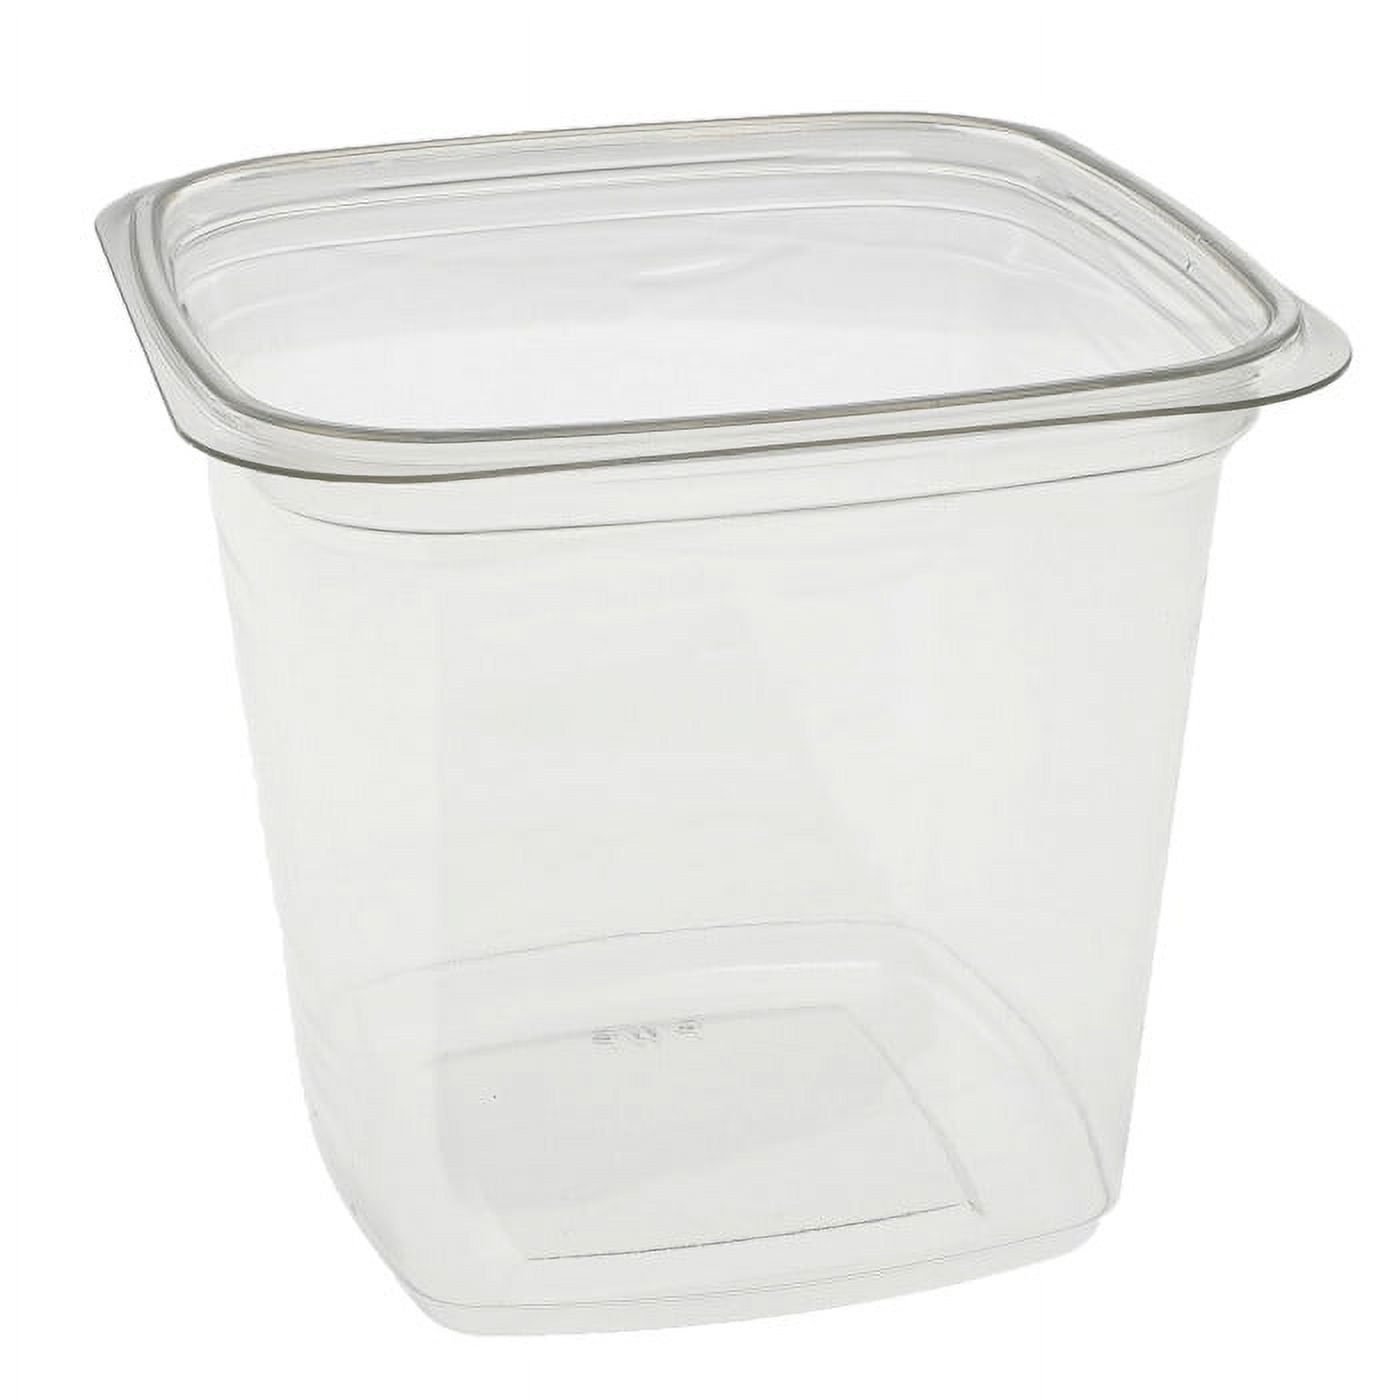 Pactiv YSD2532 32 oz. Plastic Deli Container with Lid - 240/Case